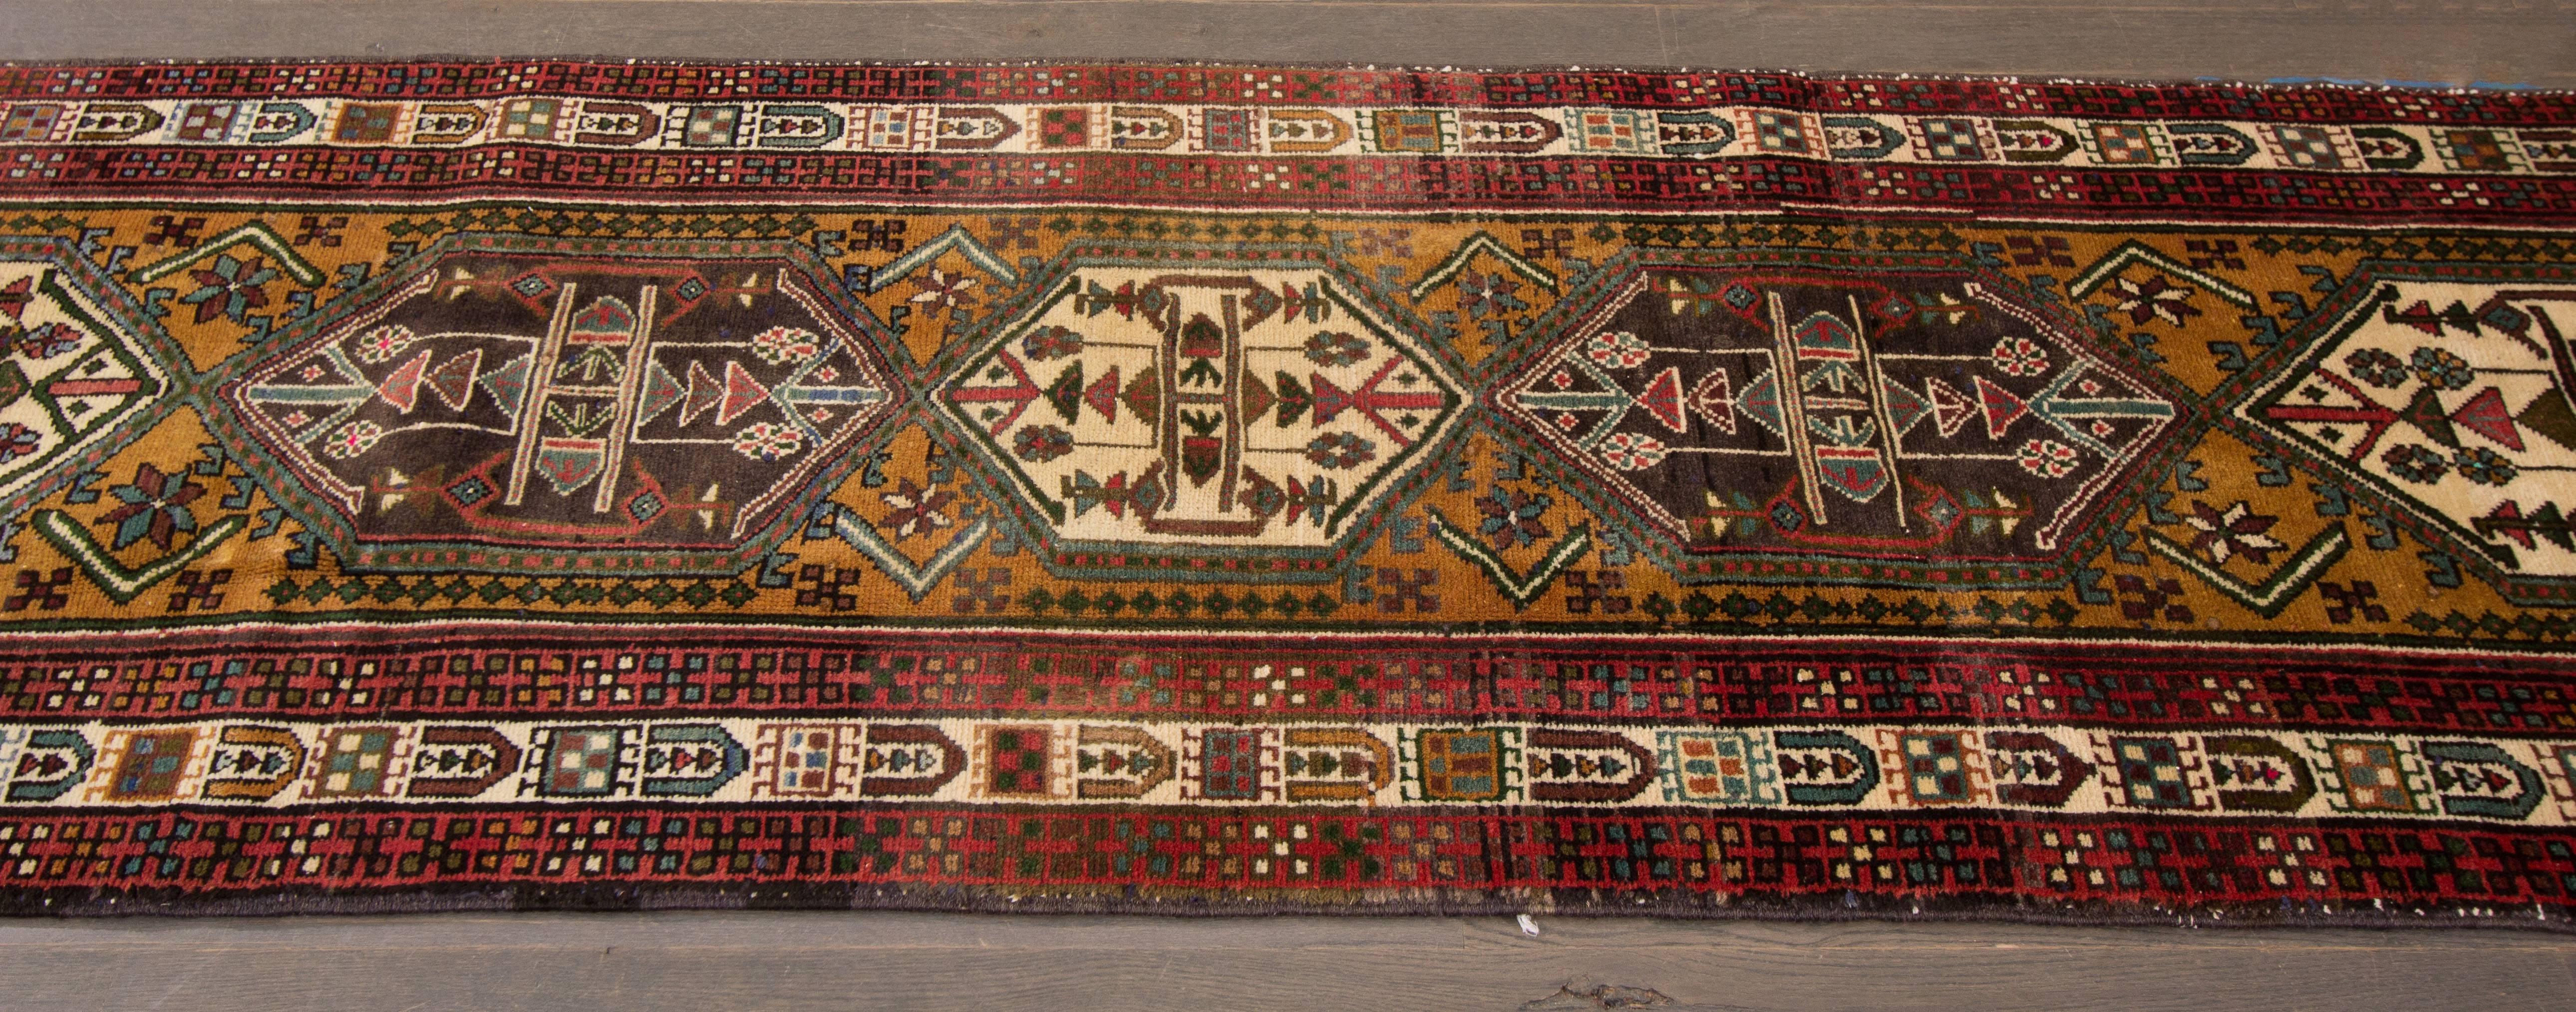 Heriz carpets are beloved for their versatility. Their geometry complements modern furnishings and their warm colors and artistic depth enhance antiques of all kinds. This 20th century Heriz runner features five beautiful stylized geometric